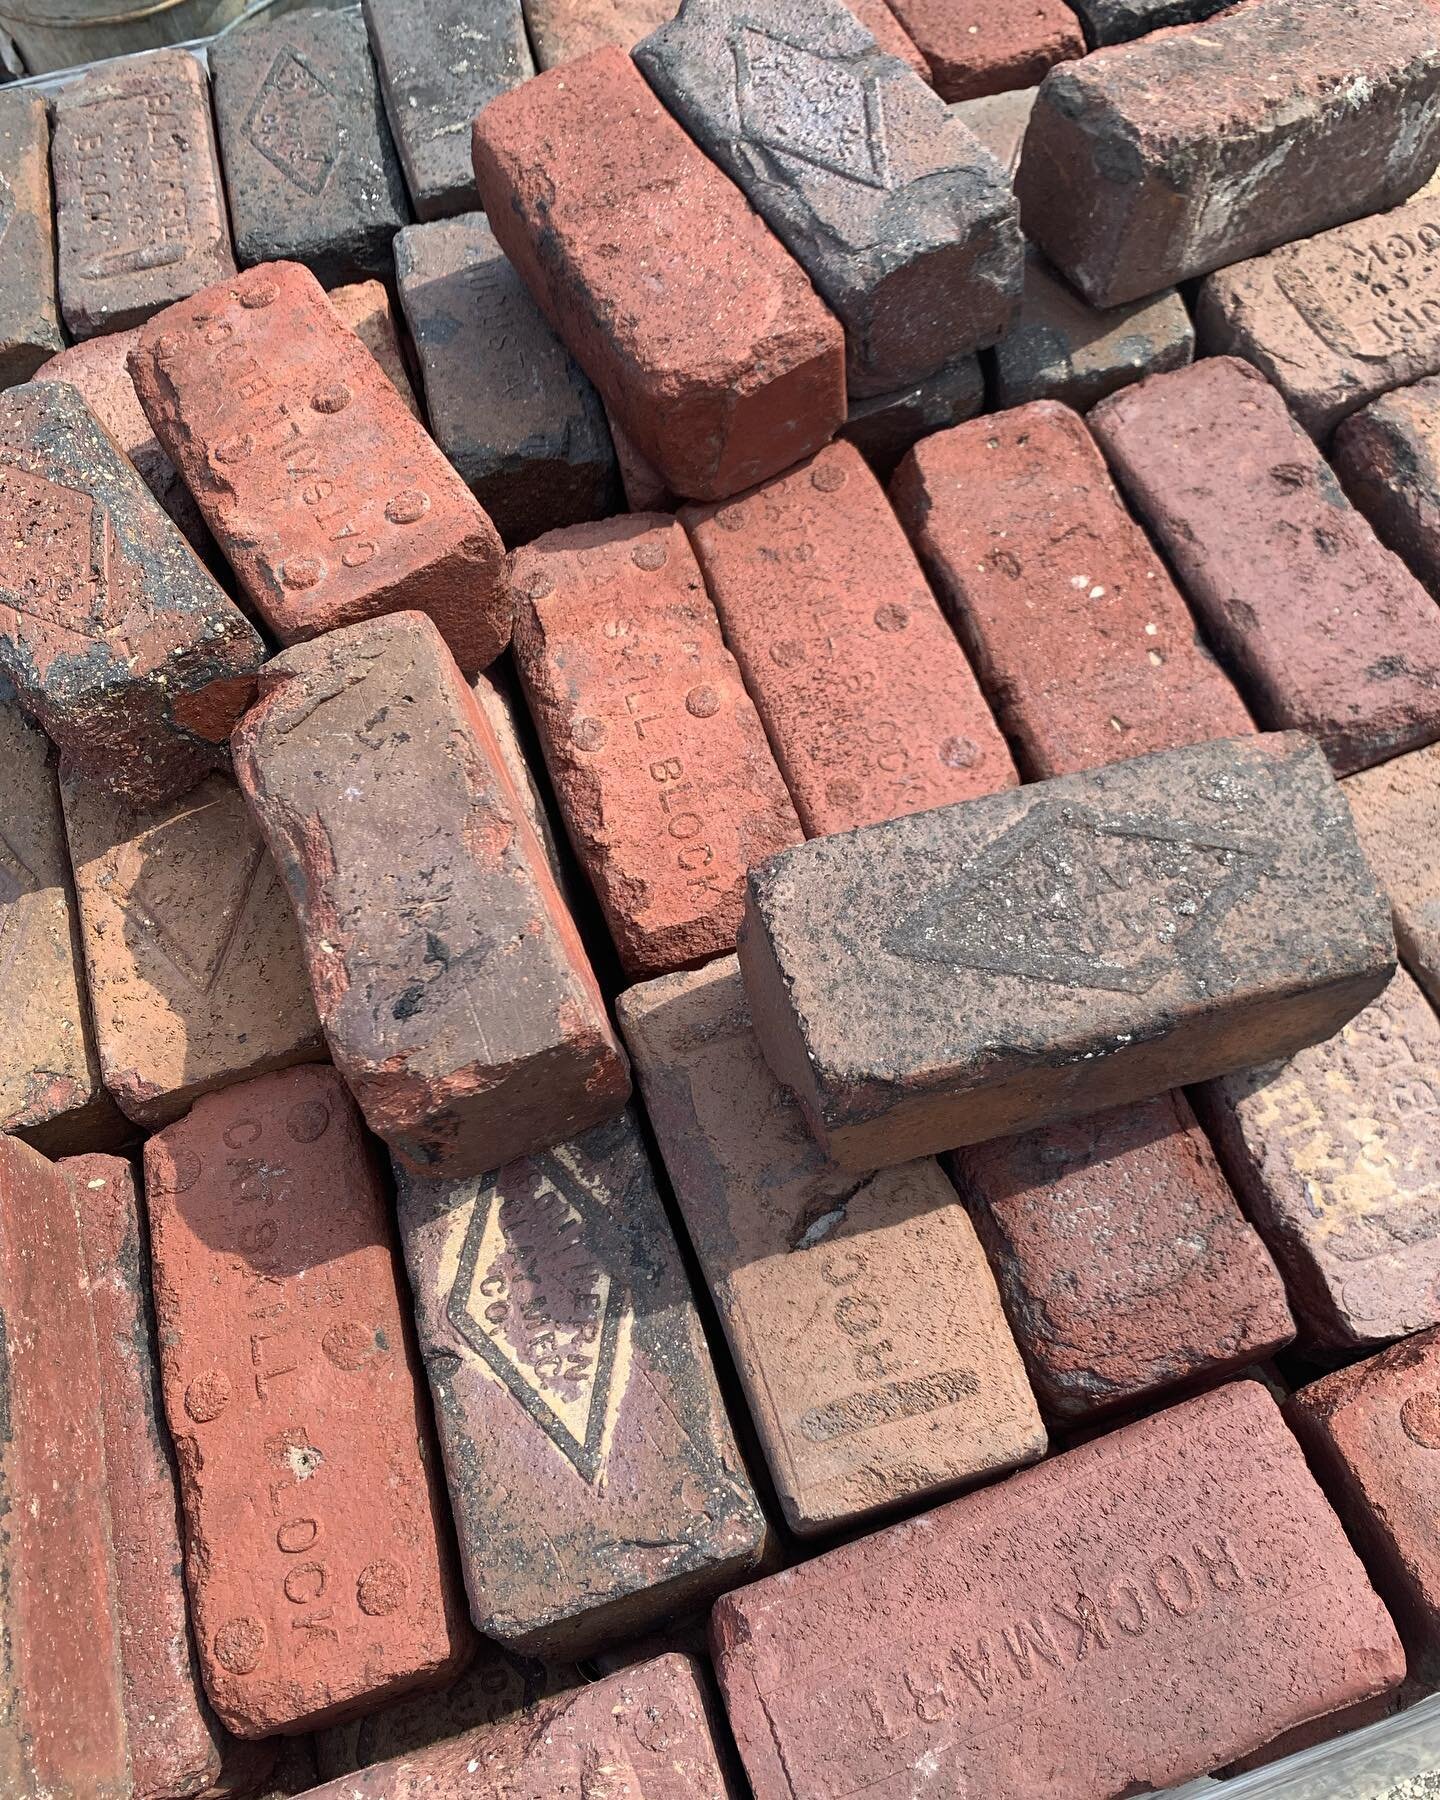 I don&rsquo;t know about you guys but I am looking forward to outside time, gardening, planting without withering in the sun. These bricks would be a great pathway to that&hellip; #salvage #antiques  #vintage #gardendesign #gardening